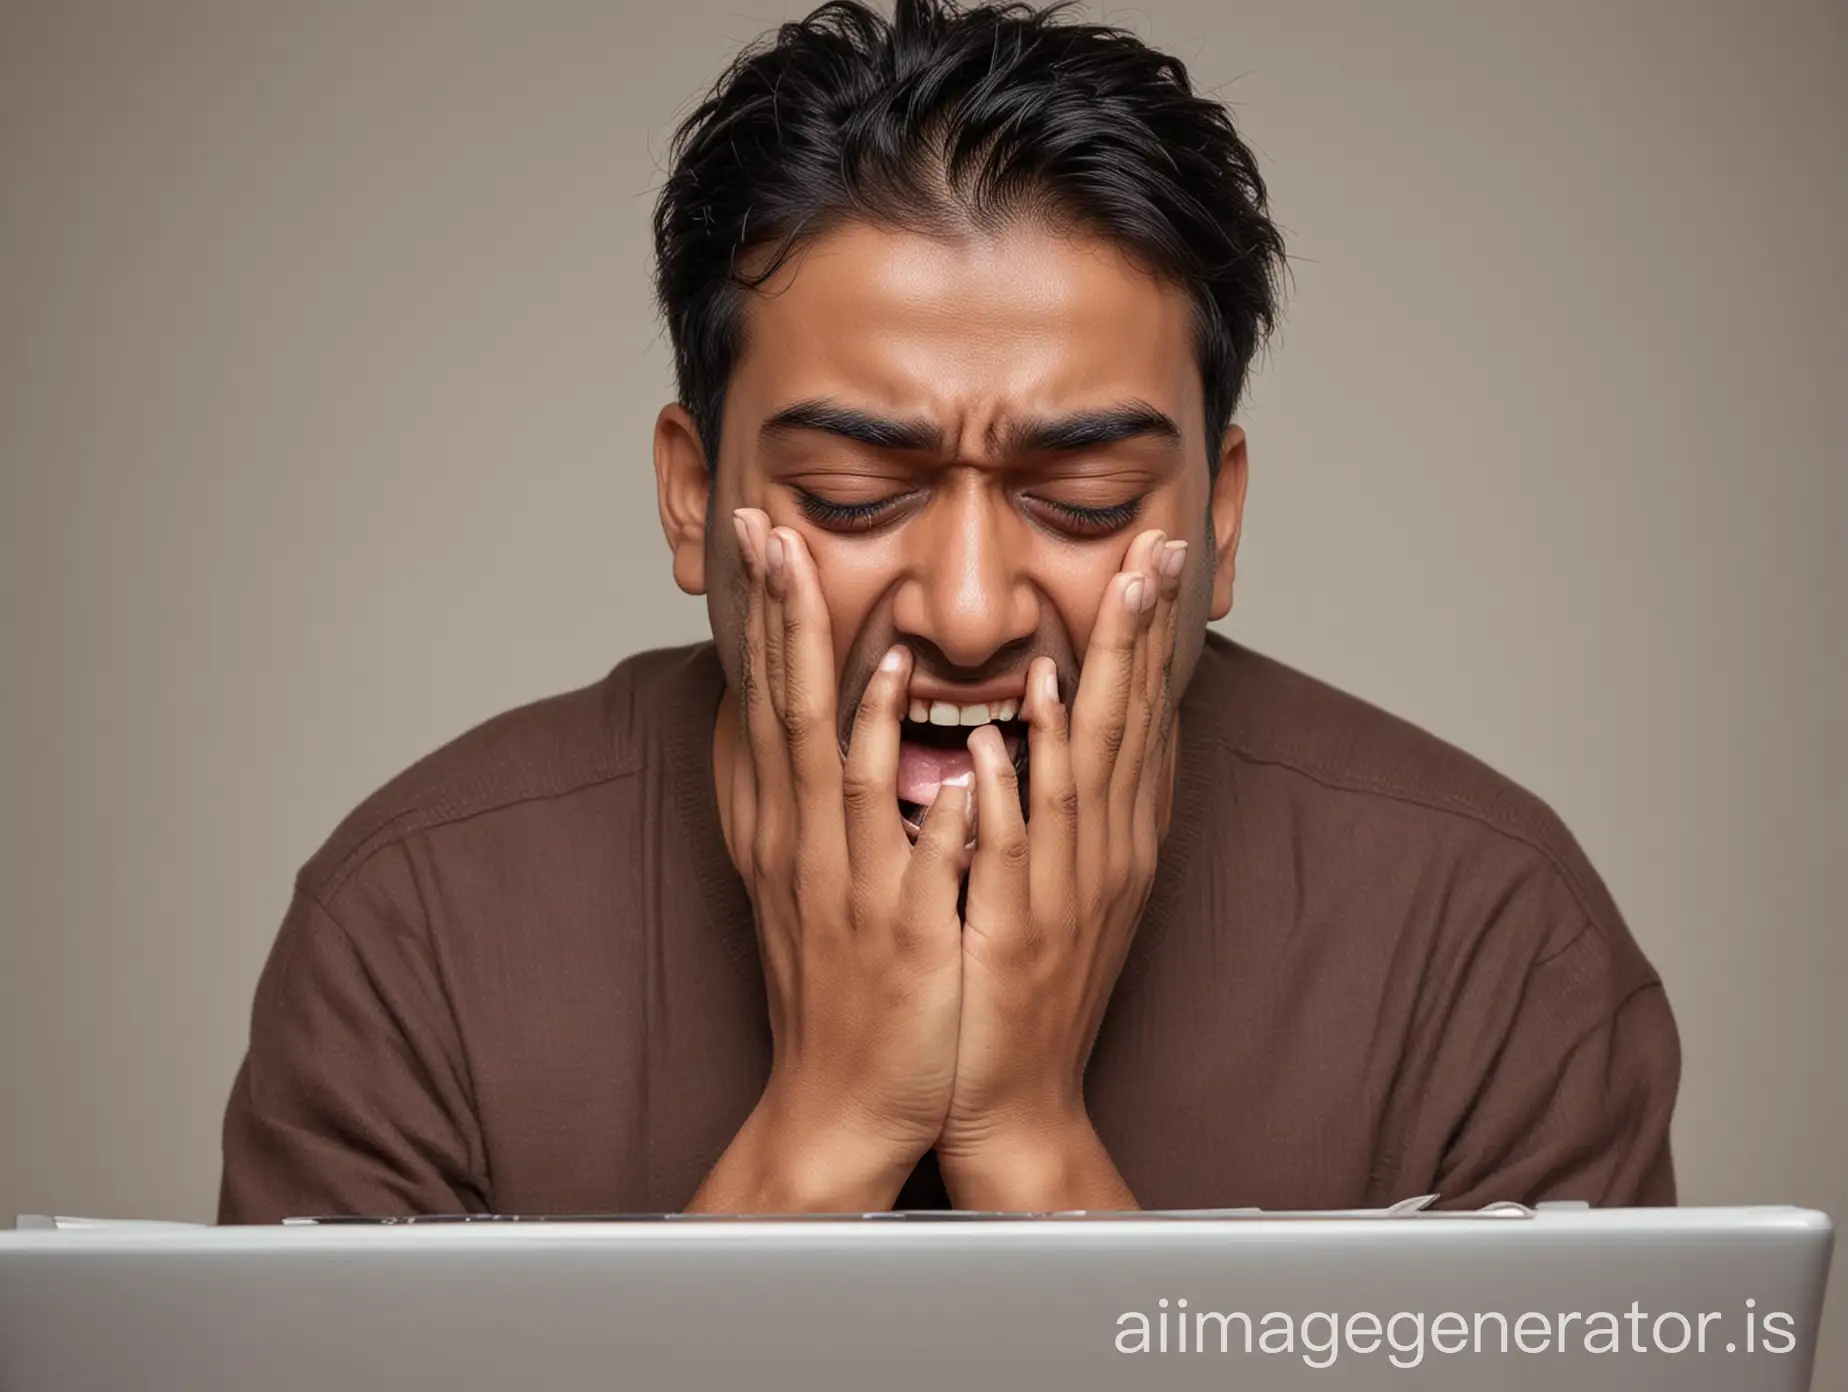 Indian-Scammer-Crying-Emotional-Portrait-of-a-Person-in-Distress